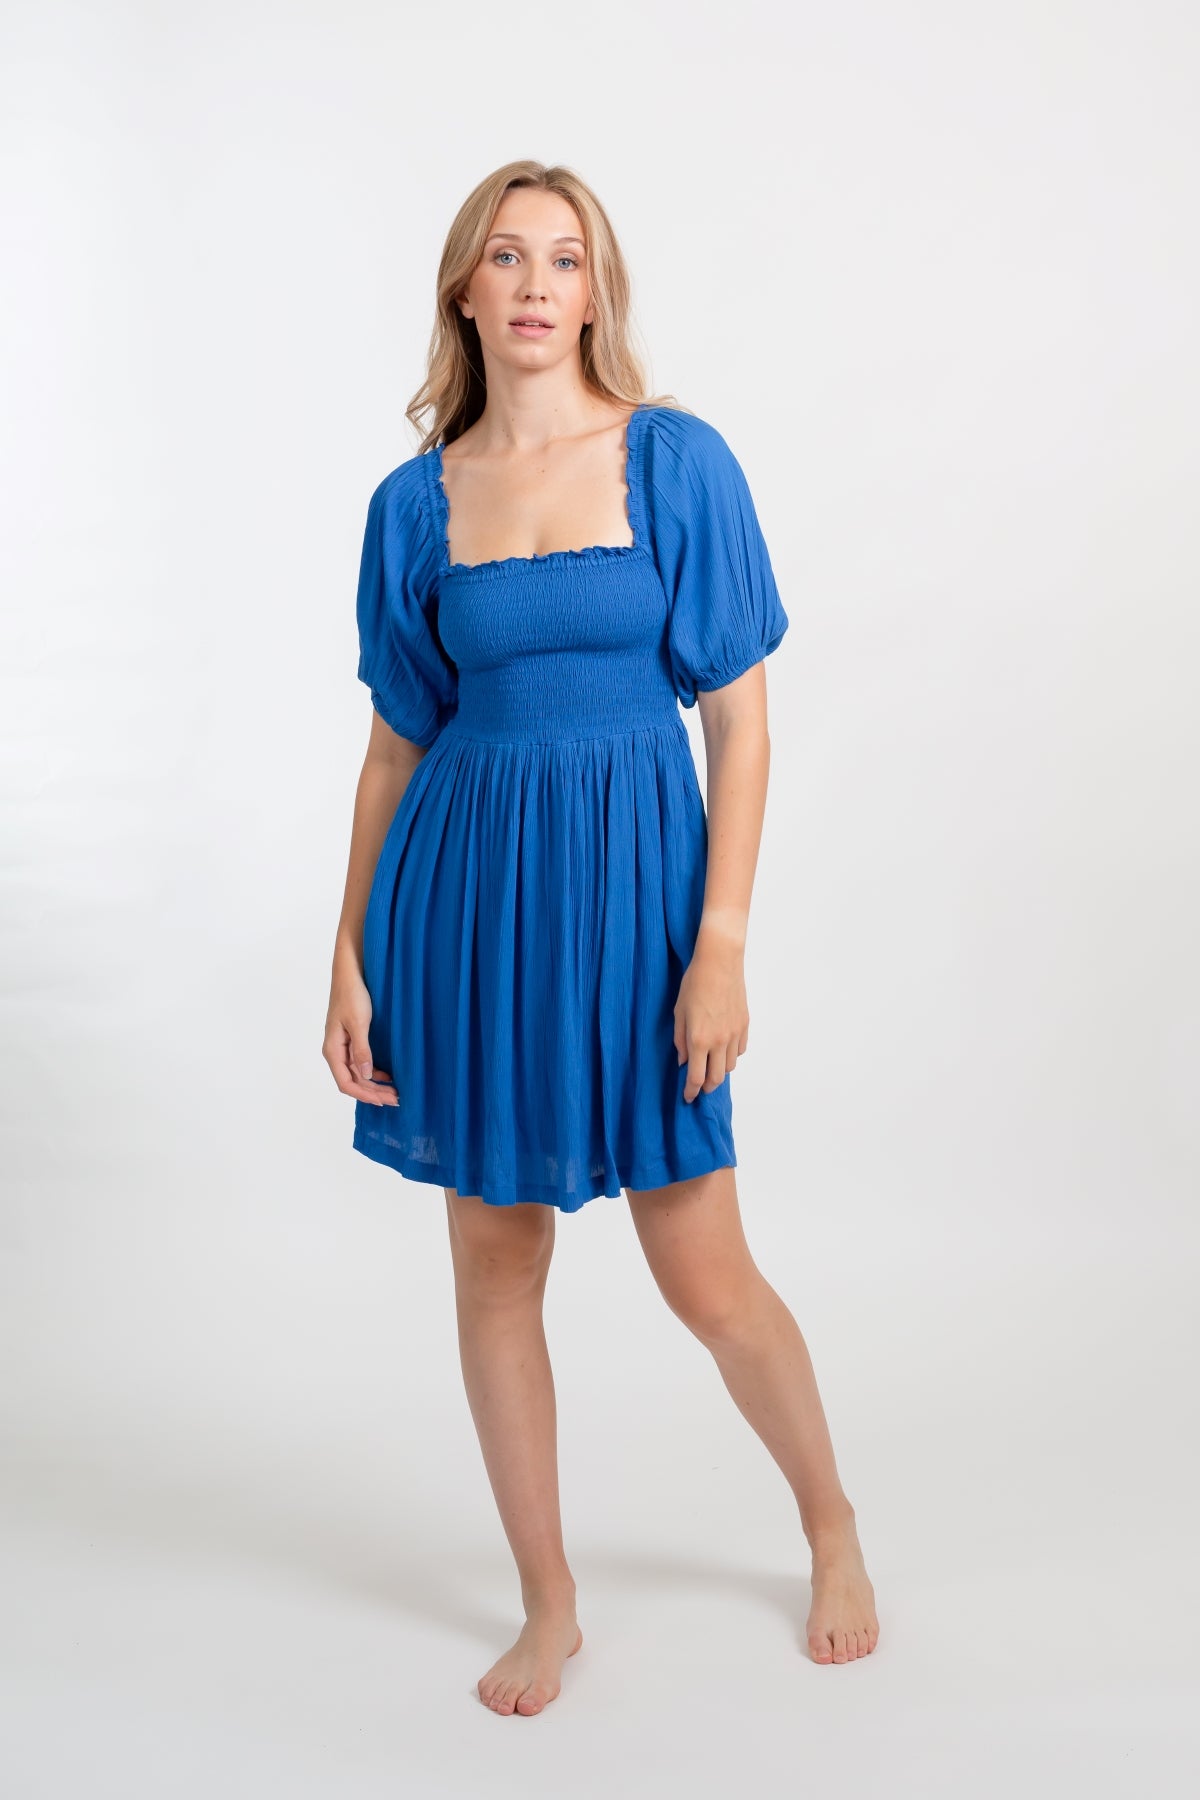 Blonde model facing front, wearing Blue Cobalt Miami Smocked Mini Dress. Features a smocked bodice for a figure-flattering fit and puffy peasant-style sleeves for a bohemian touch. Perfect for the beach, a summer wedding, or a night out. Koy Resort affordable vacation, cruise, and resort-wear.sort-wear.